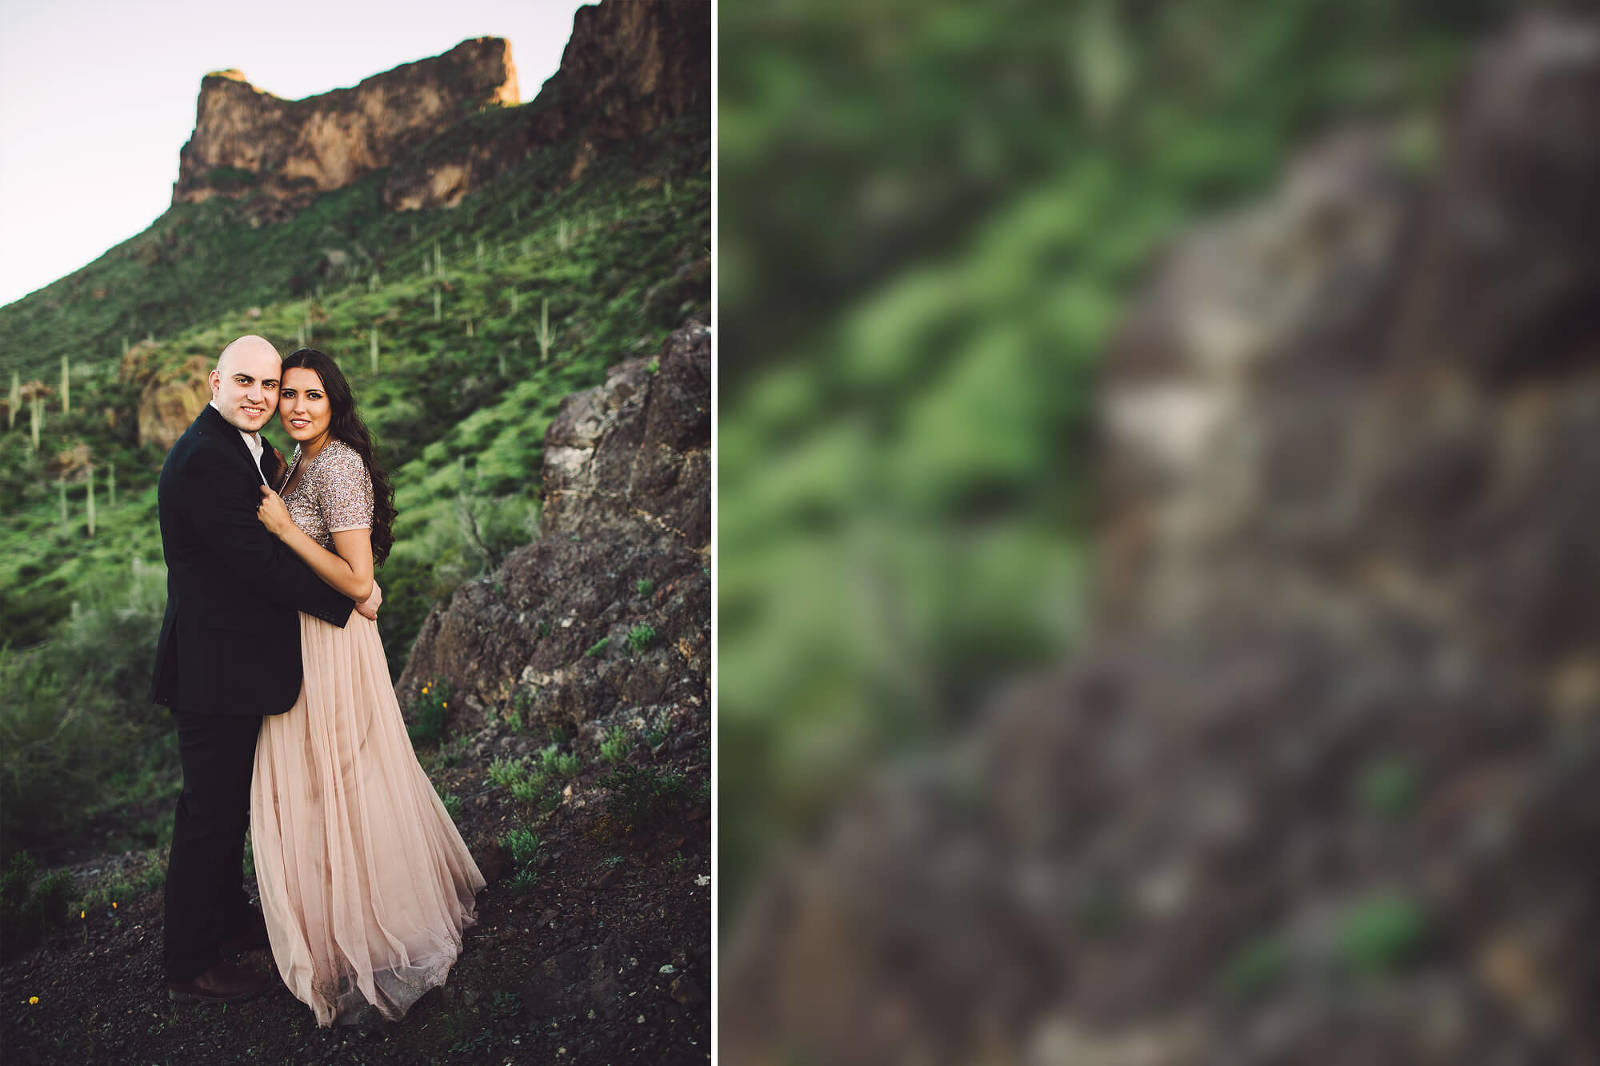 A loving couple celebrates their engagement during a sunset photo session at Picacho Peak in Arizona with Belle Vie Photography